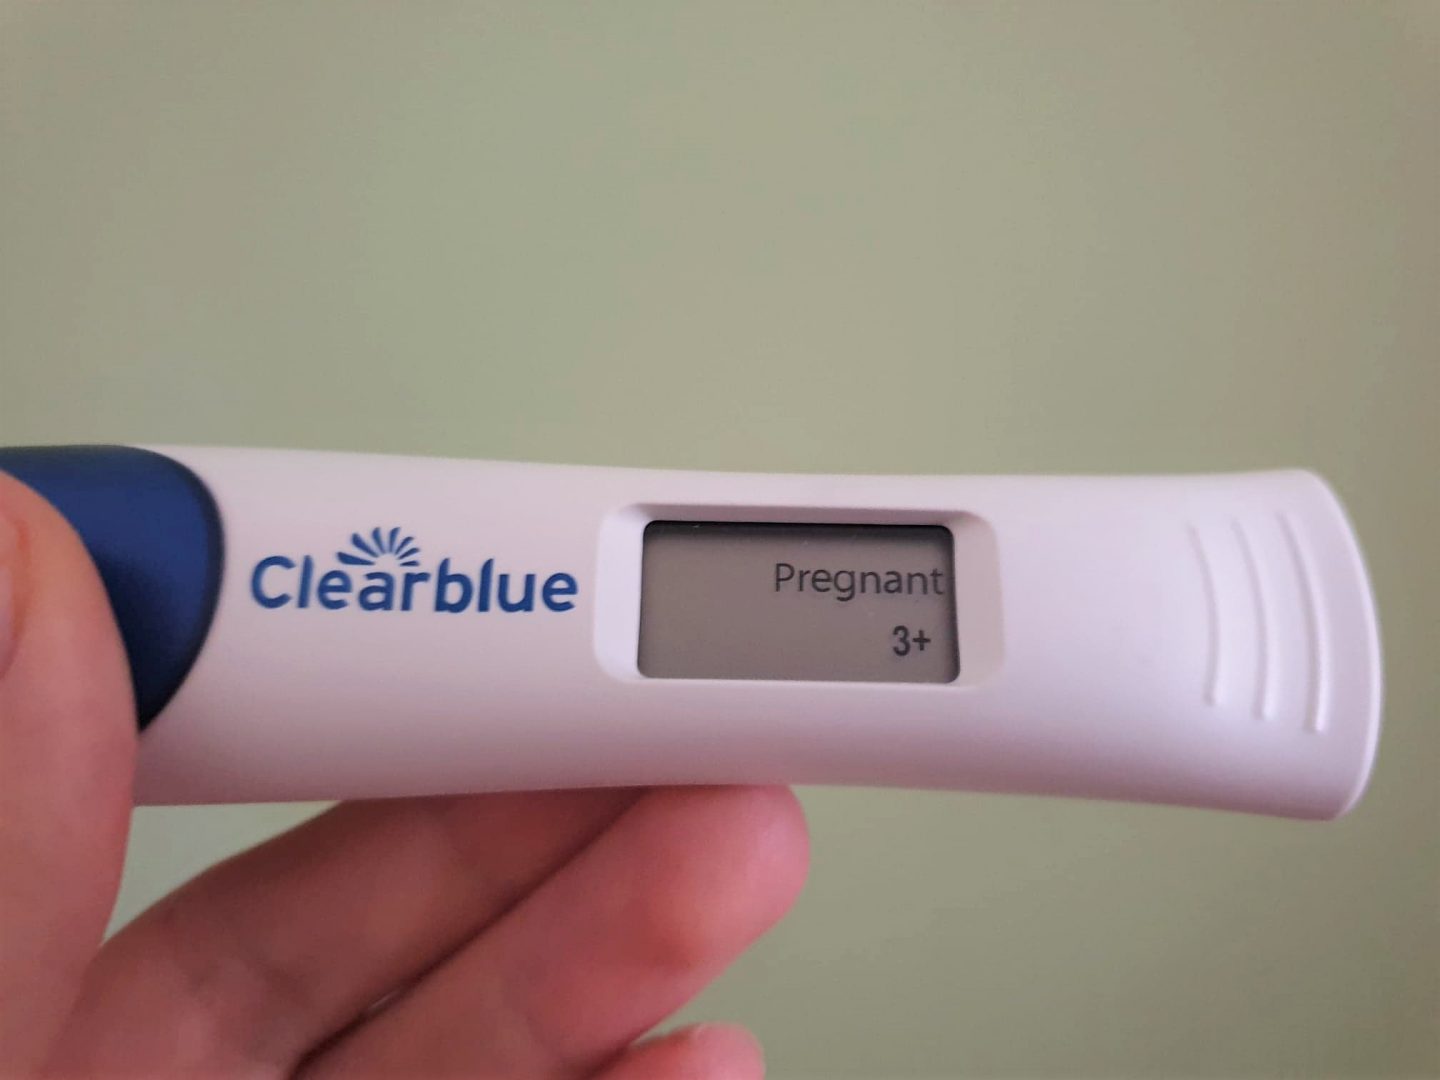 Positive Clearblue pregnancy test